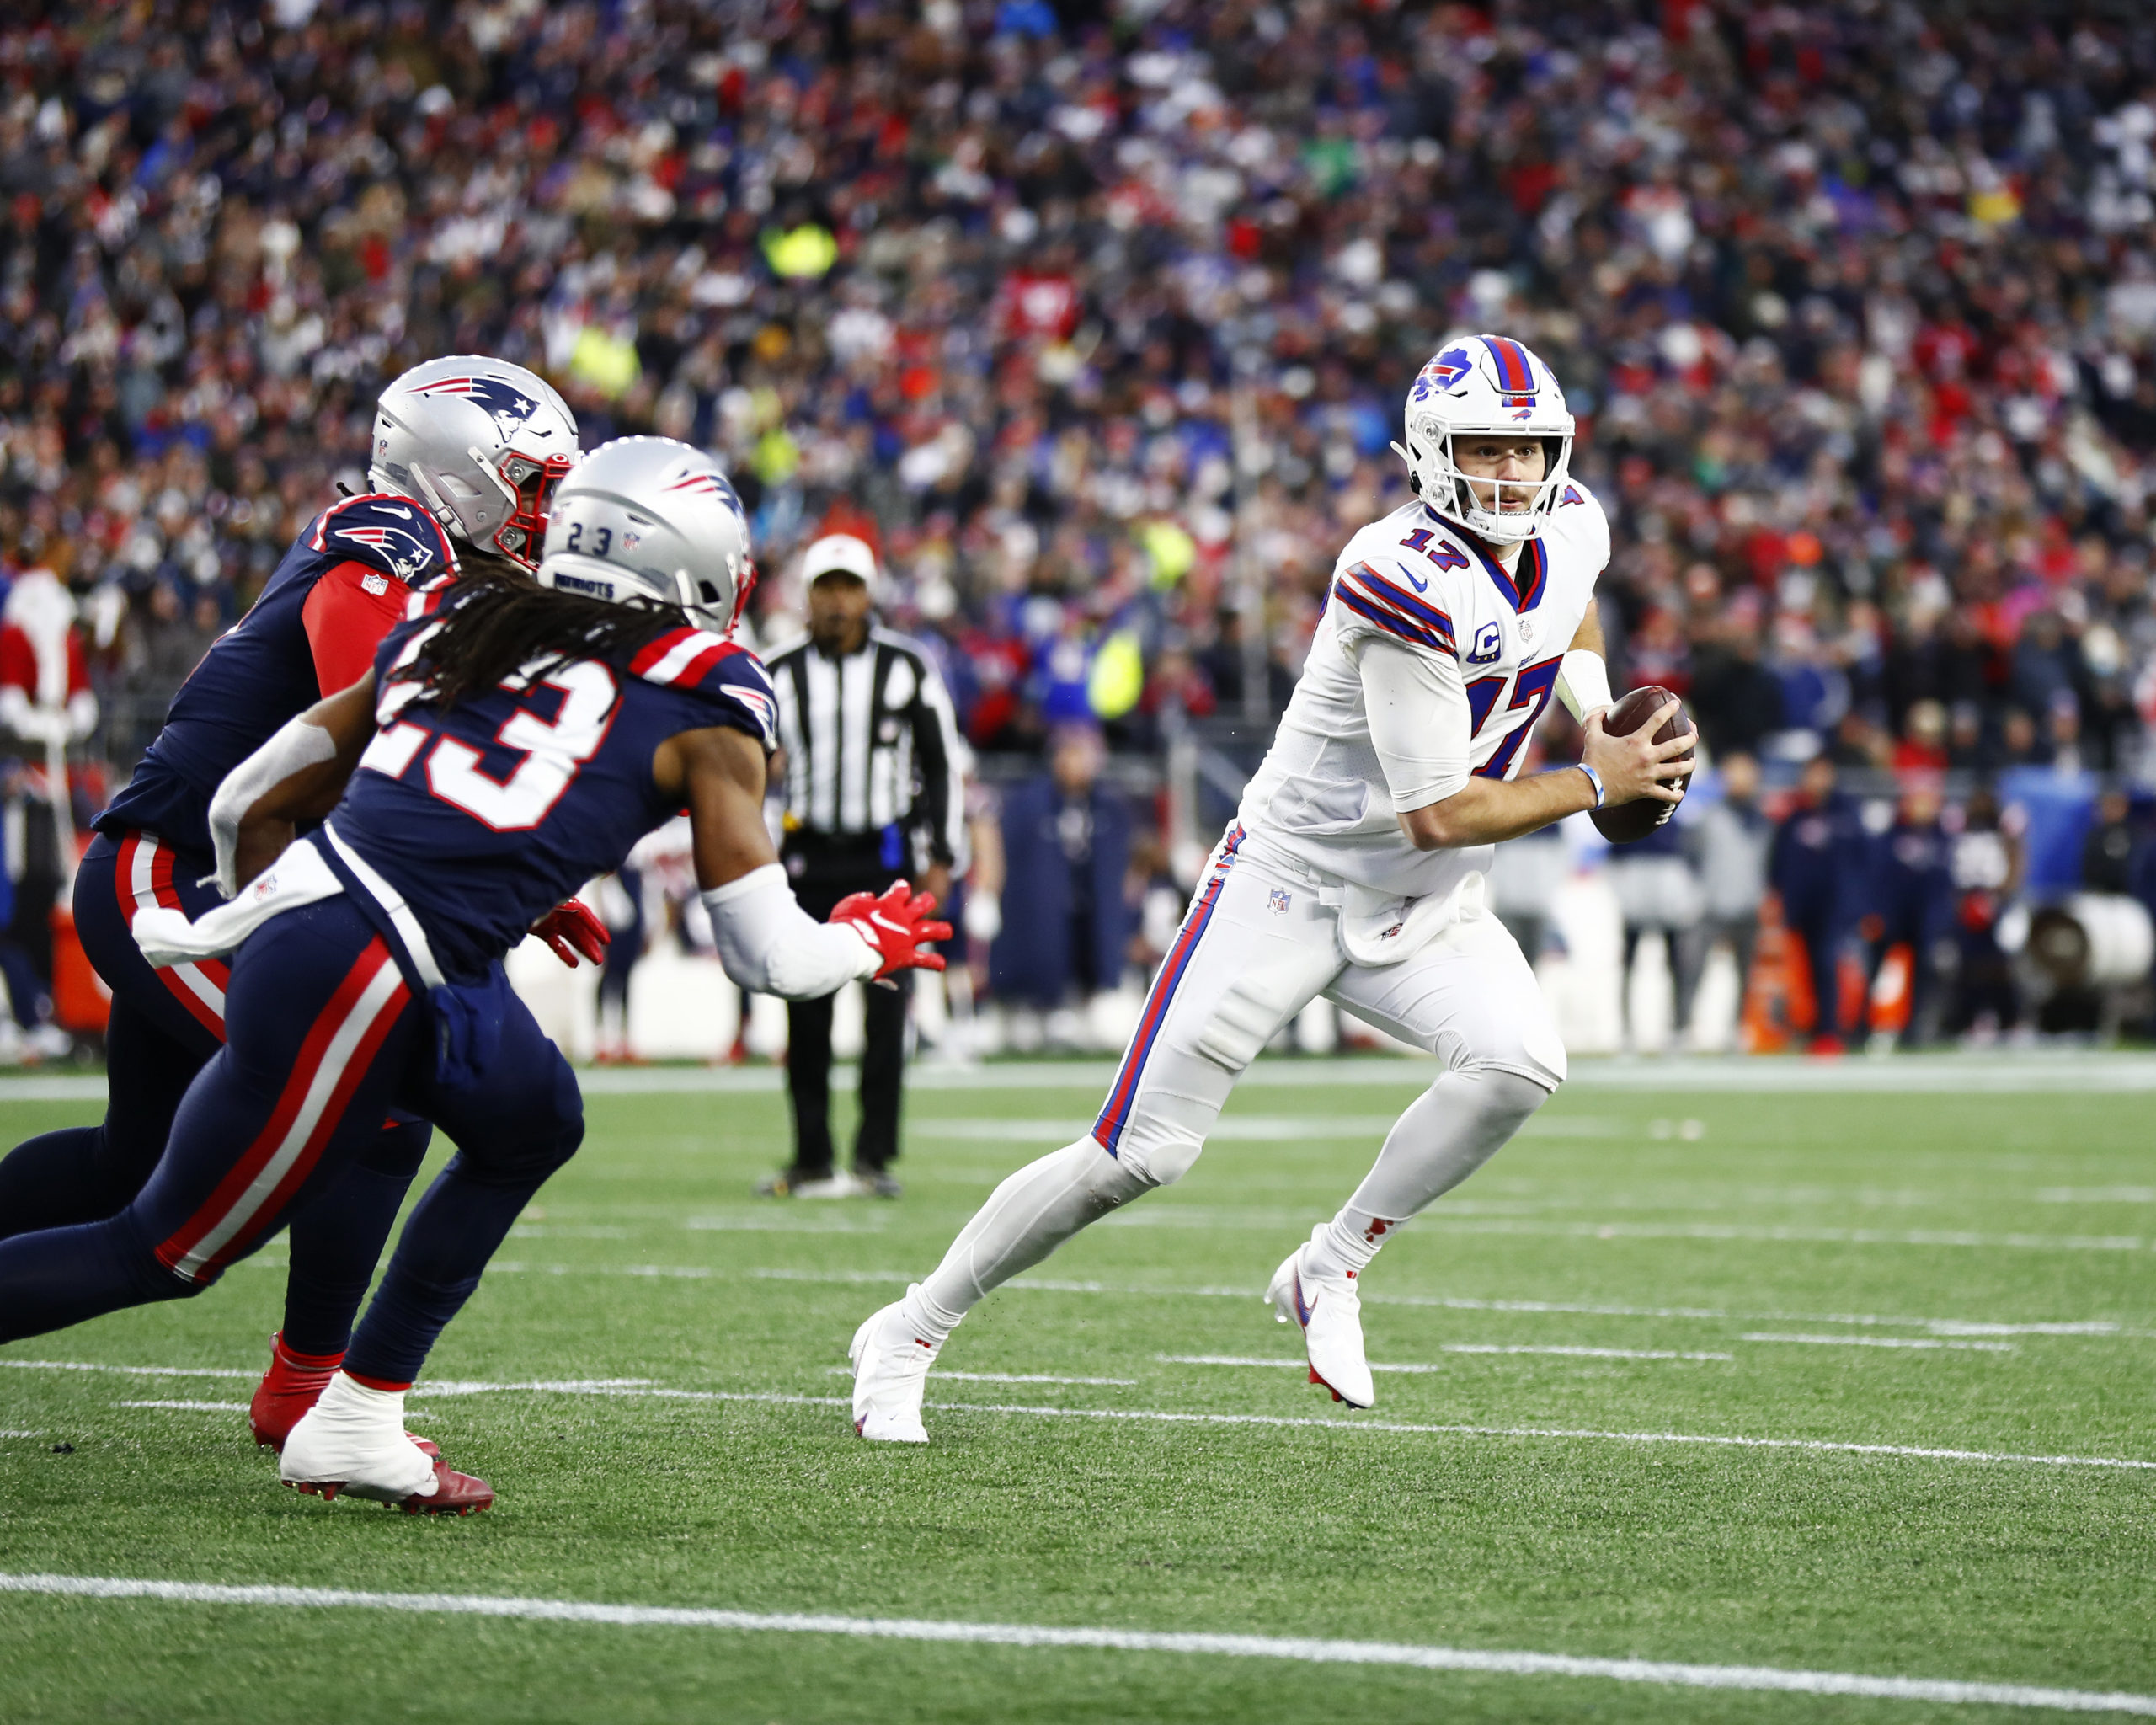 FOXBOROUGH, MASSACHUSETTS - DECEMBER 26: Quarterback Josh Allen #17 of the Buffalo Bills rolls out to his left during the fourth quarter of the game against the New England Patriots at Gillette Stadium on December 26, 2021 in Foxborough, Massachusetts. (Photo by Omar Rawlings/Getty Images)